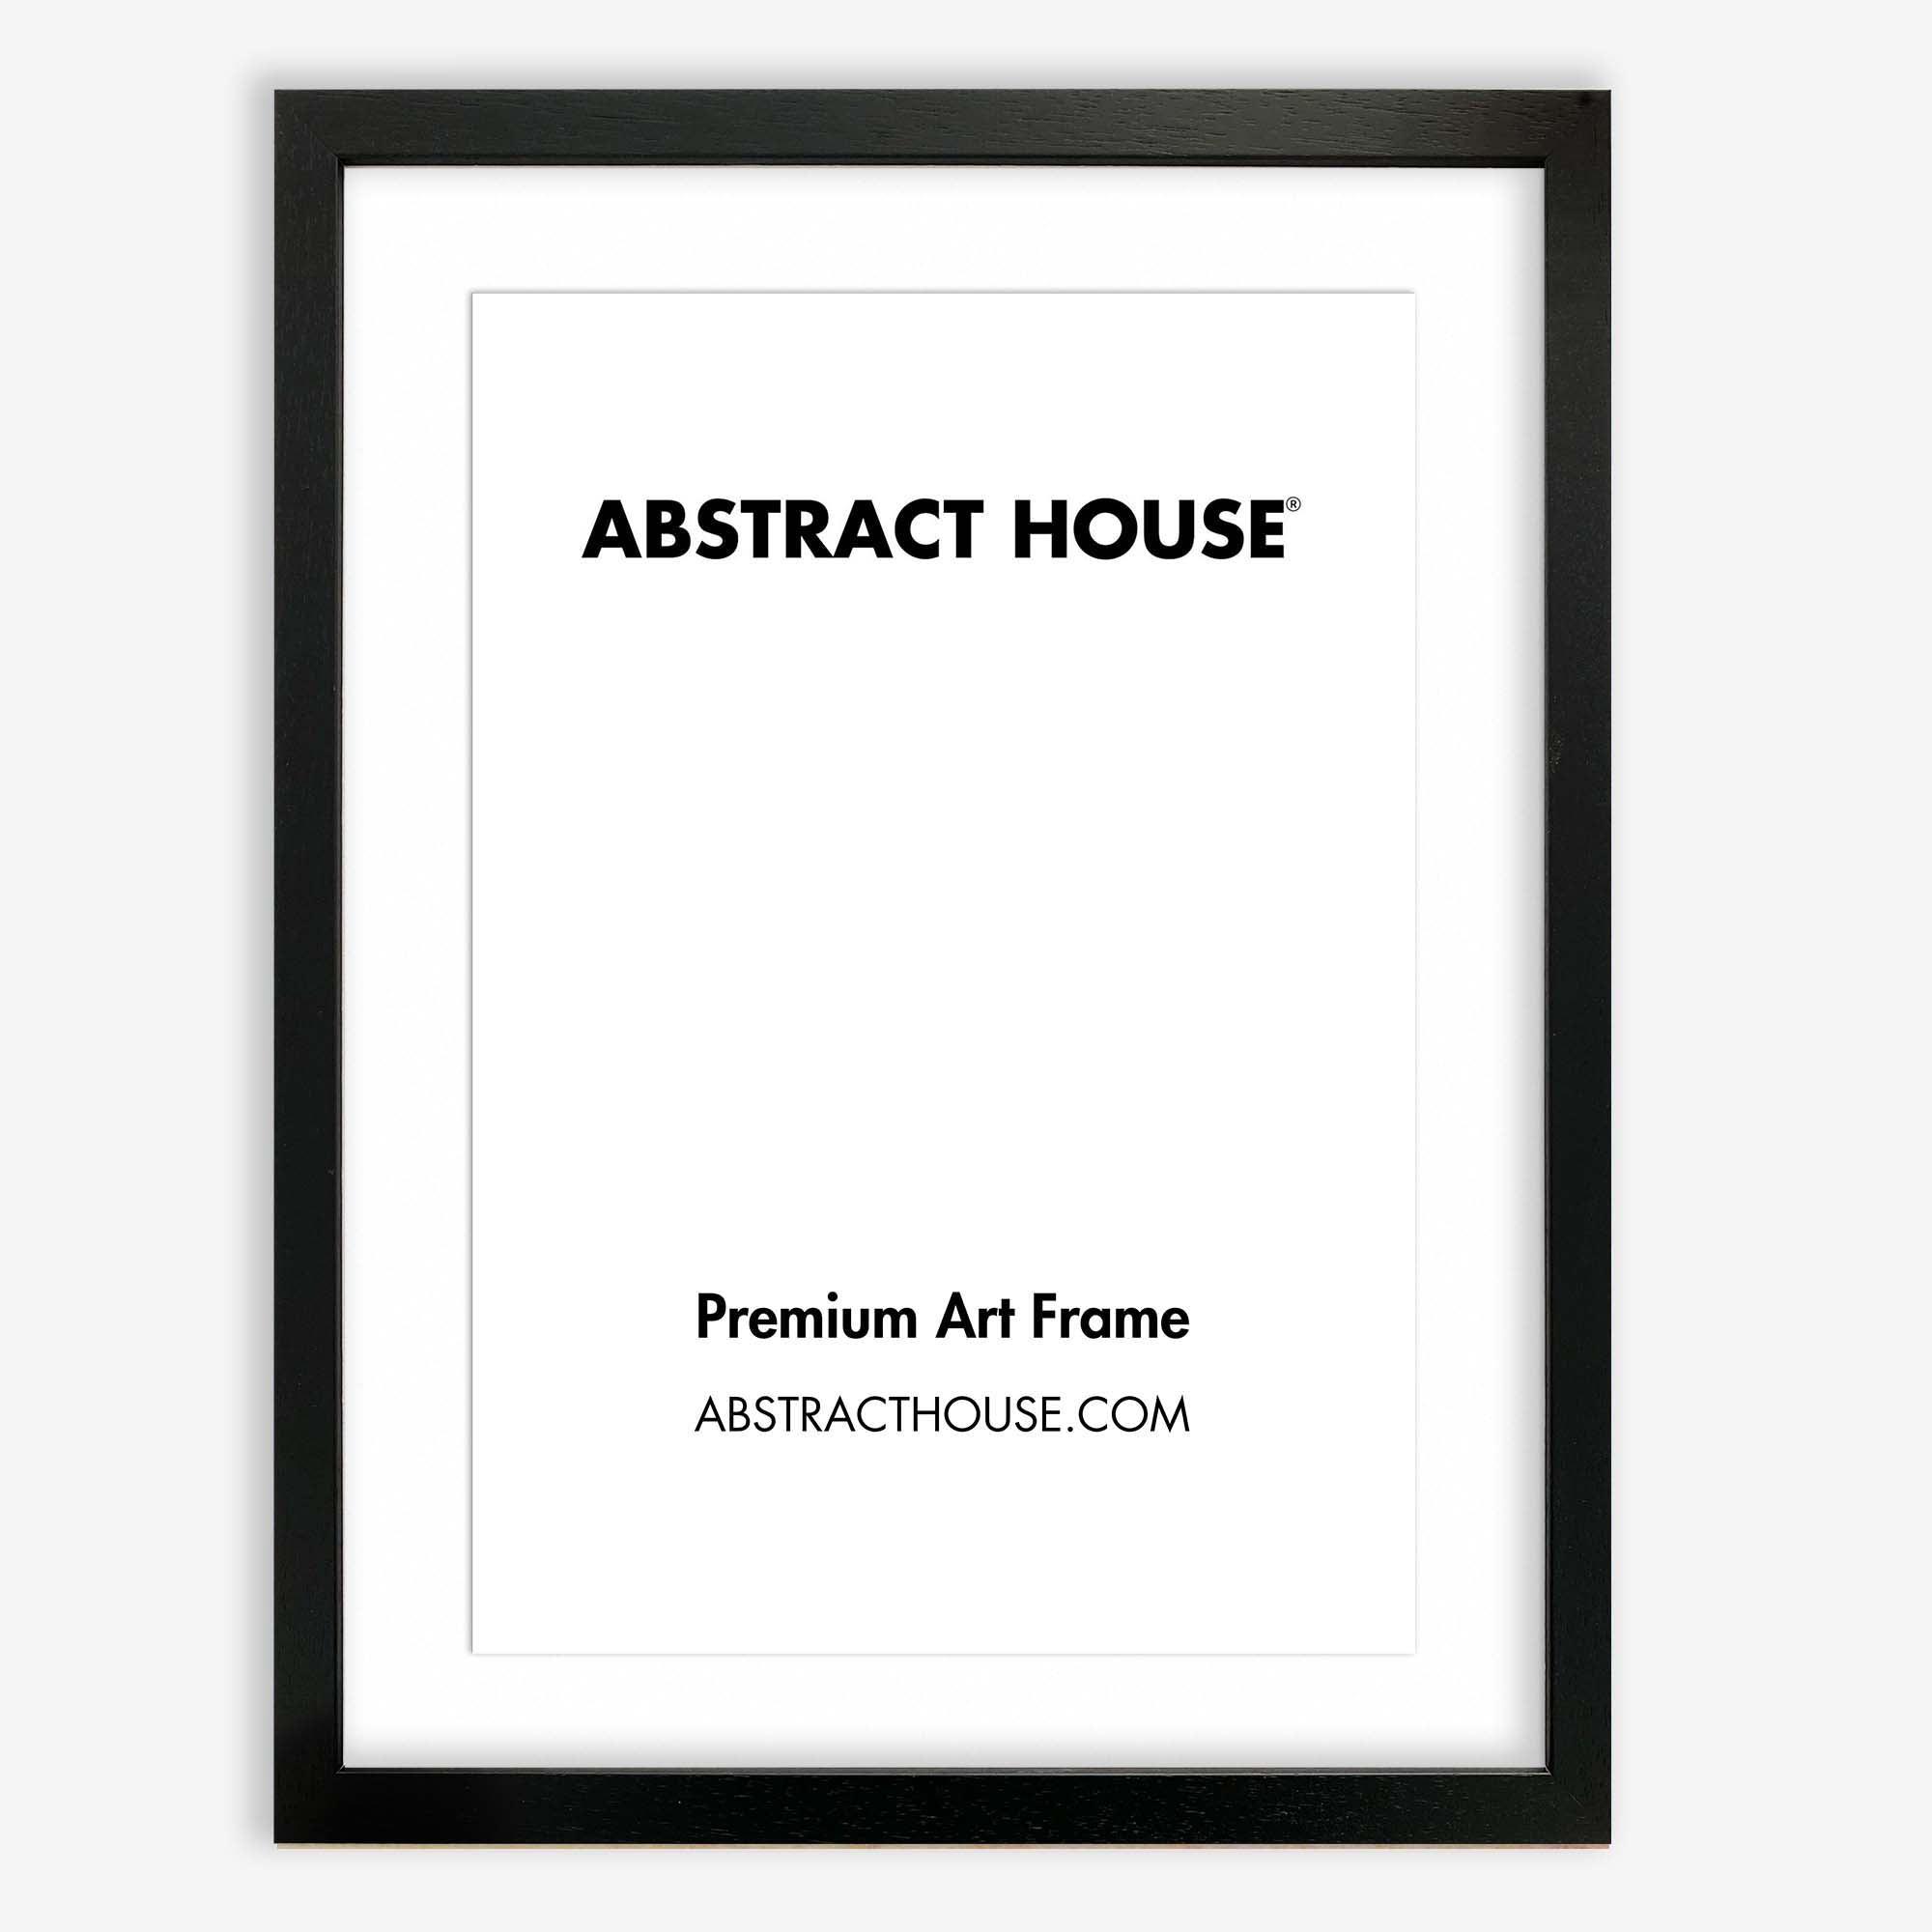 50x60cm Wooden Frame-Black-40 x 50 cm / 15.7 x 19.7 Inches-Abstract House